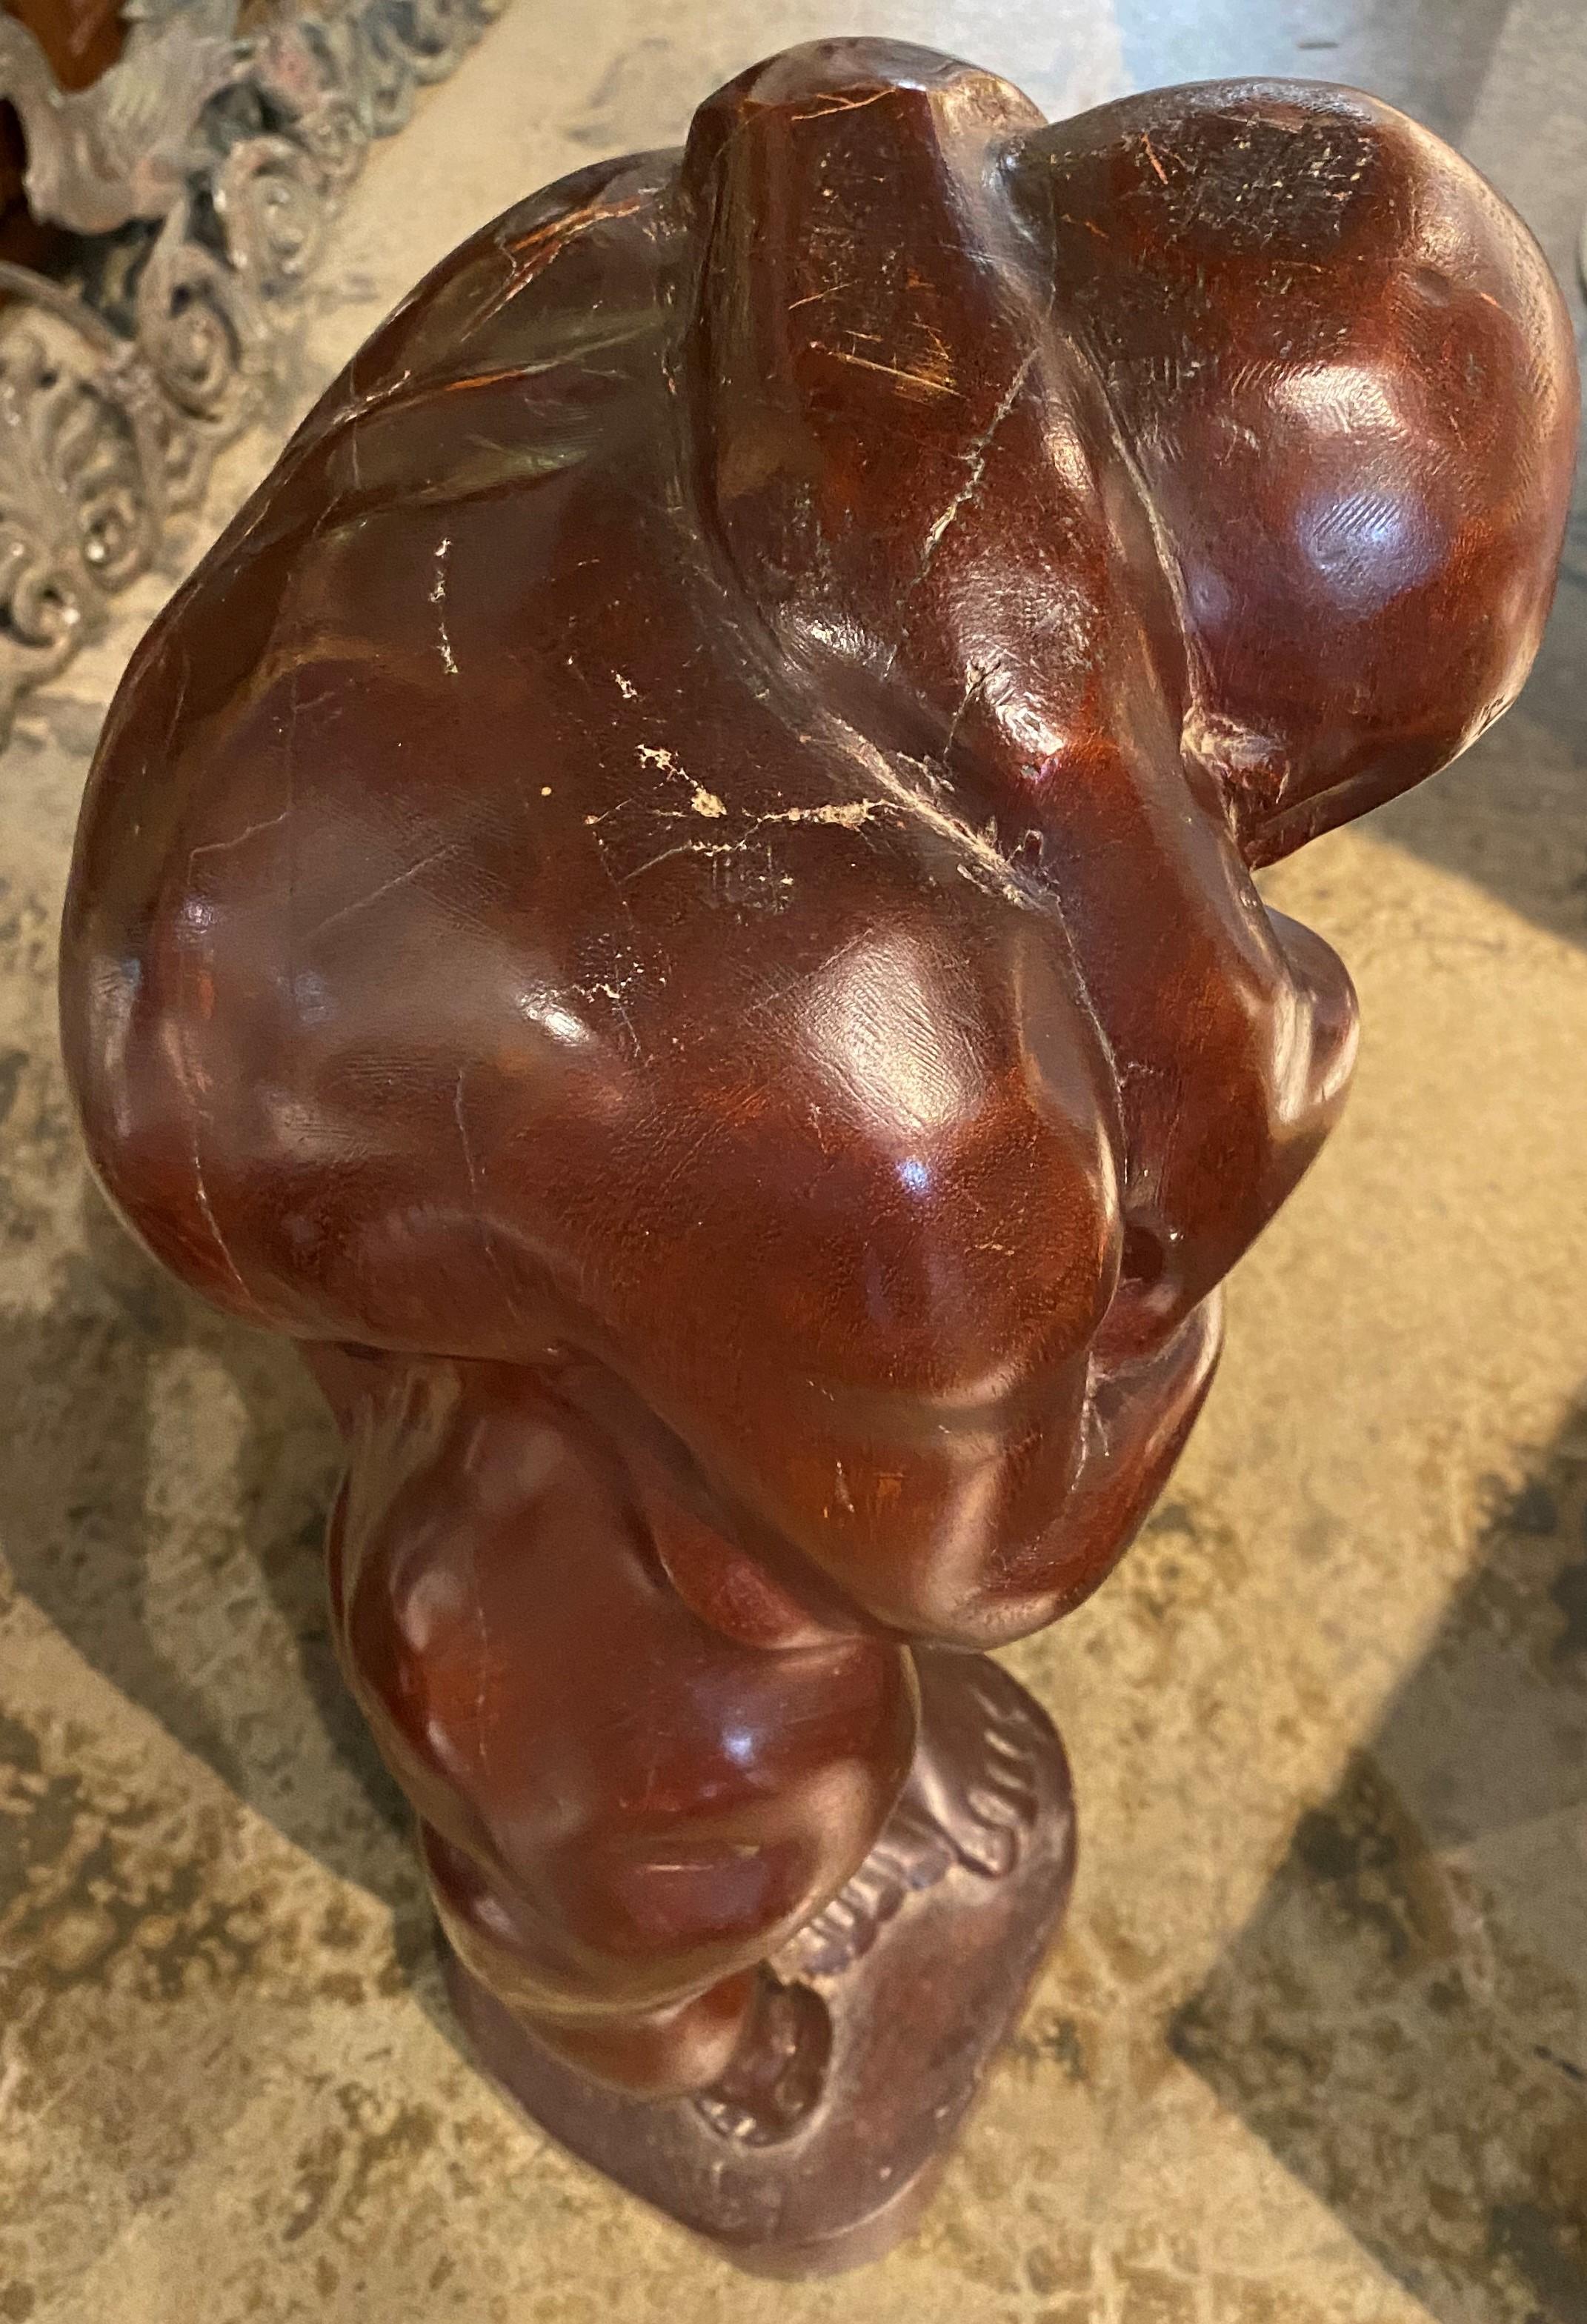 A fine modernist solid wooden sculpture of a nude couple embracing in the manner of Rodin by South African artist Herman Wald (1906-1970). Wald was born into a Rabbinical family in Cluj in Hungary before the outbreak of the First World War, studied